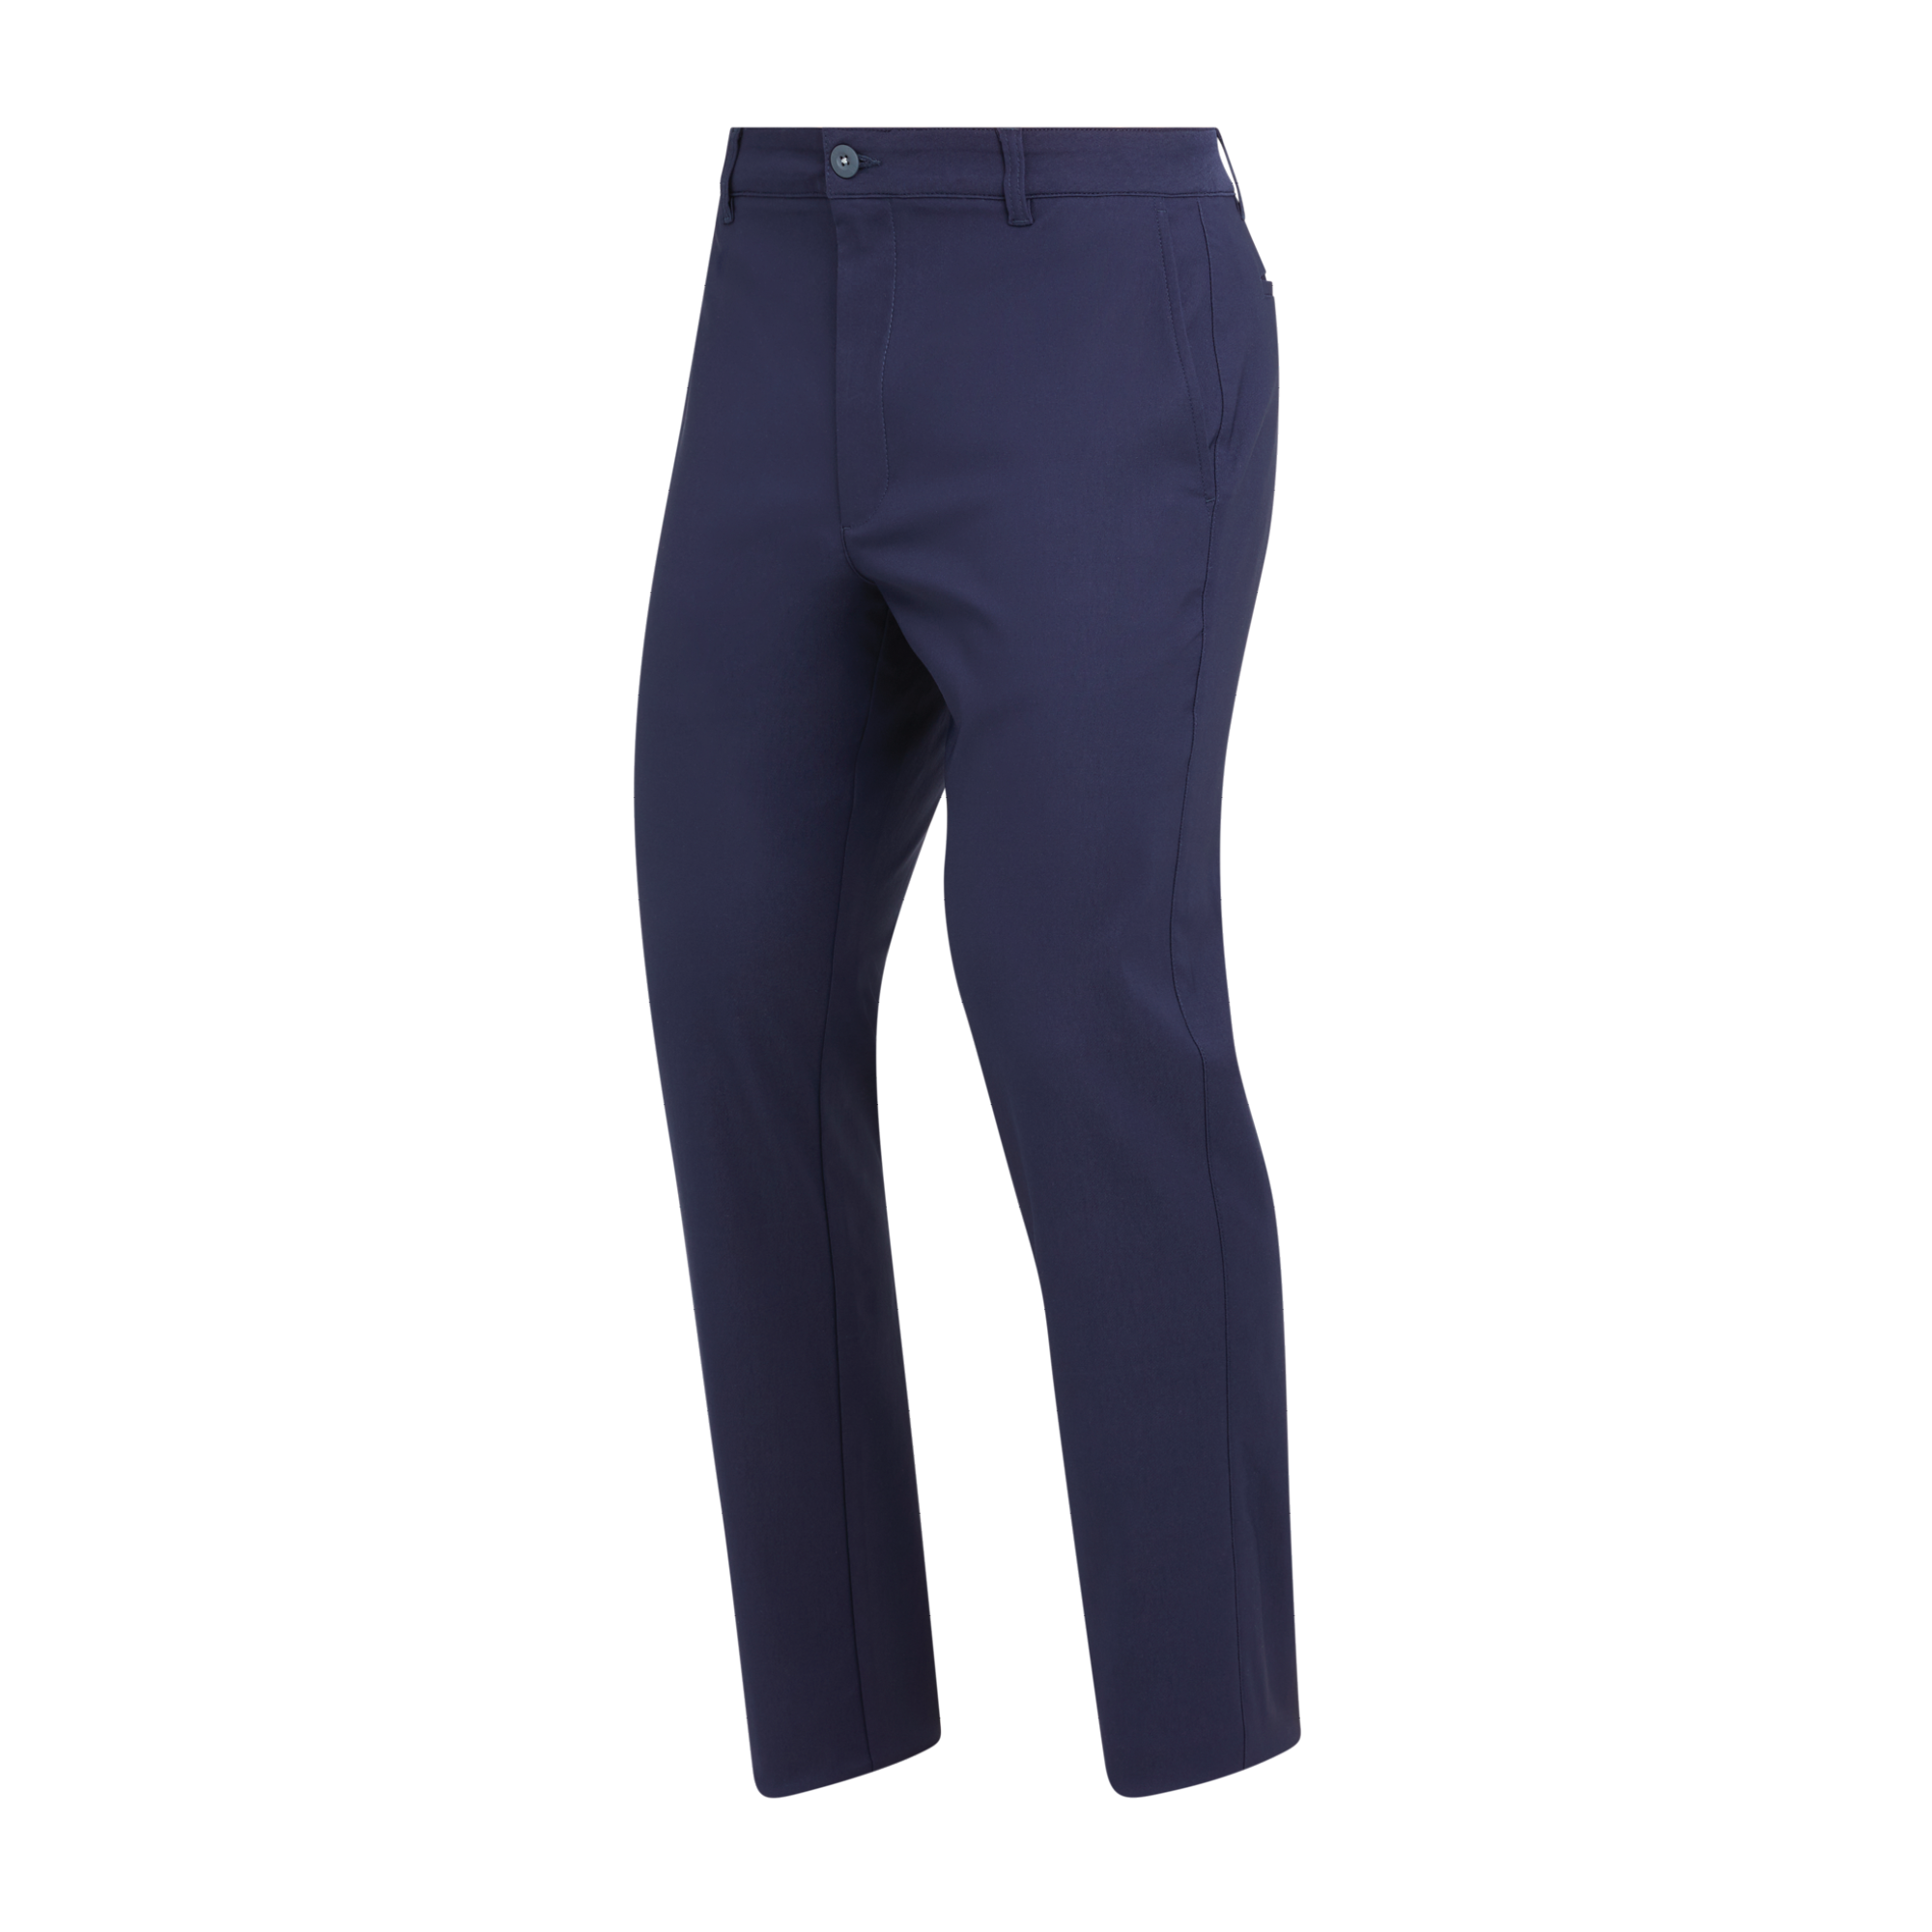 ThermoSeries Trousers - FootJoy EMEA